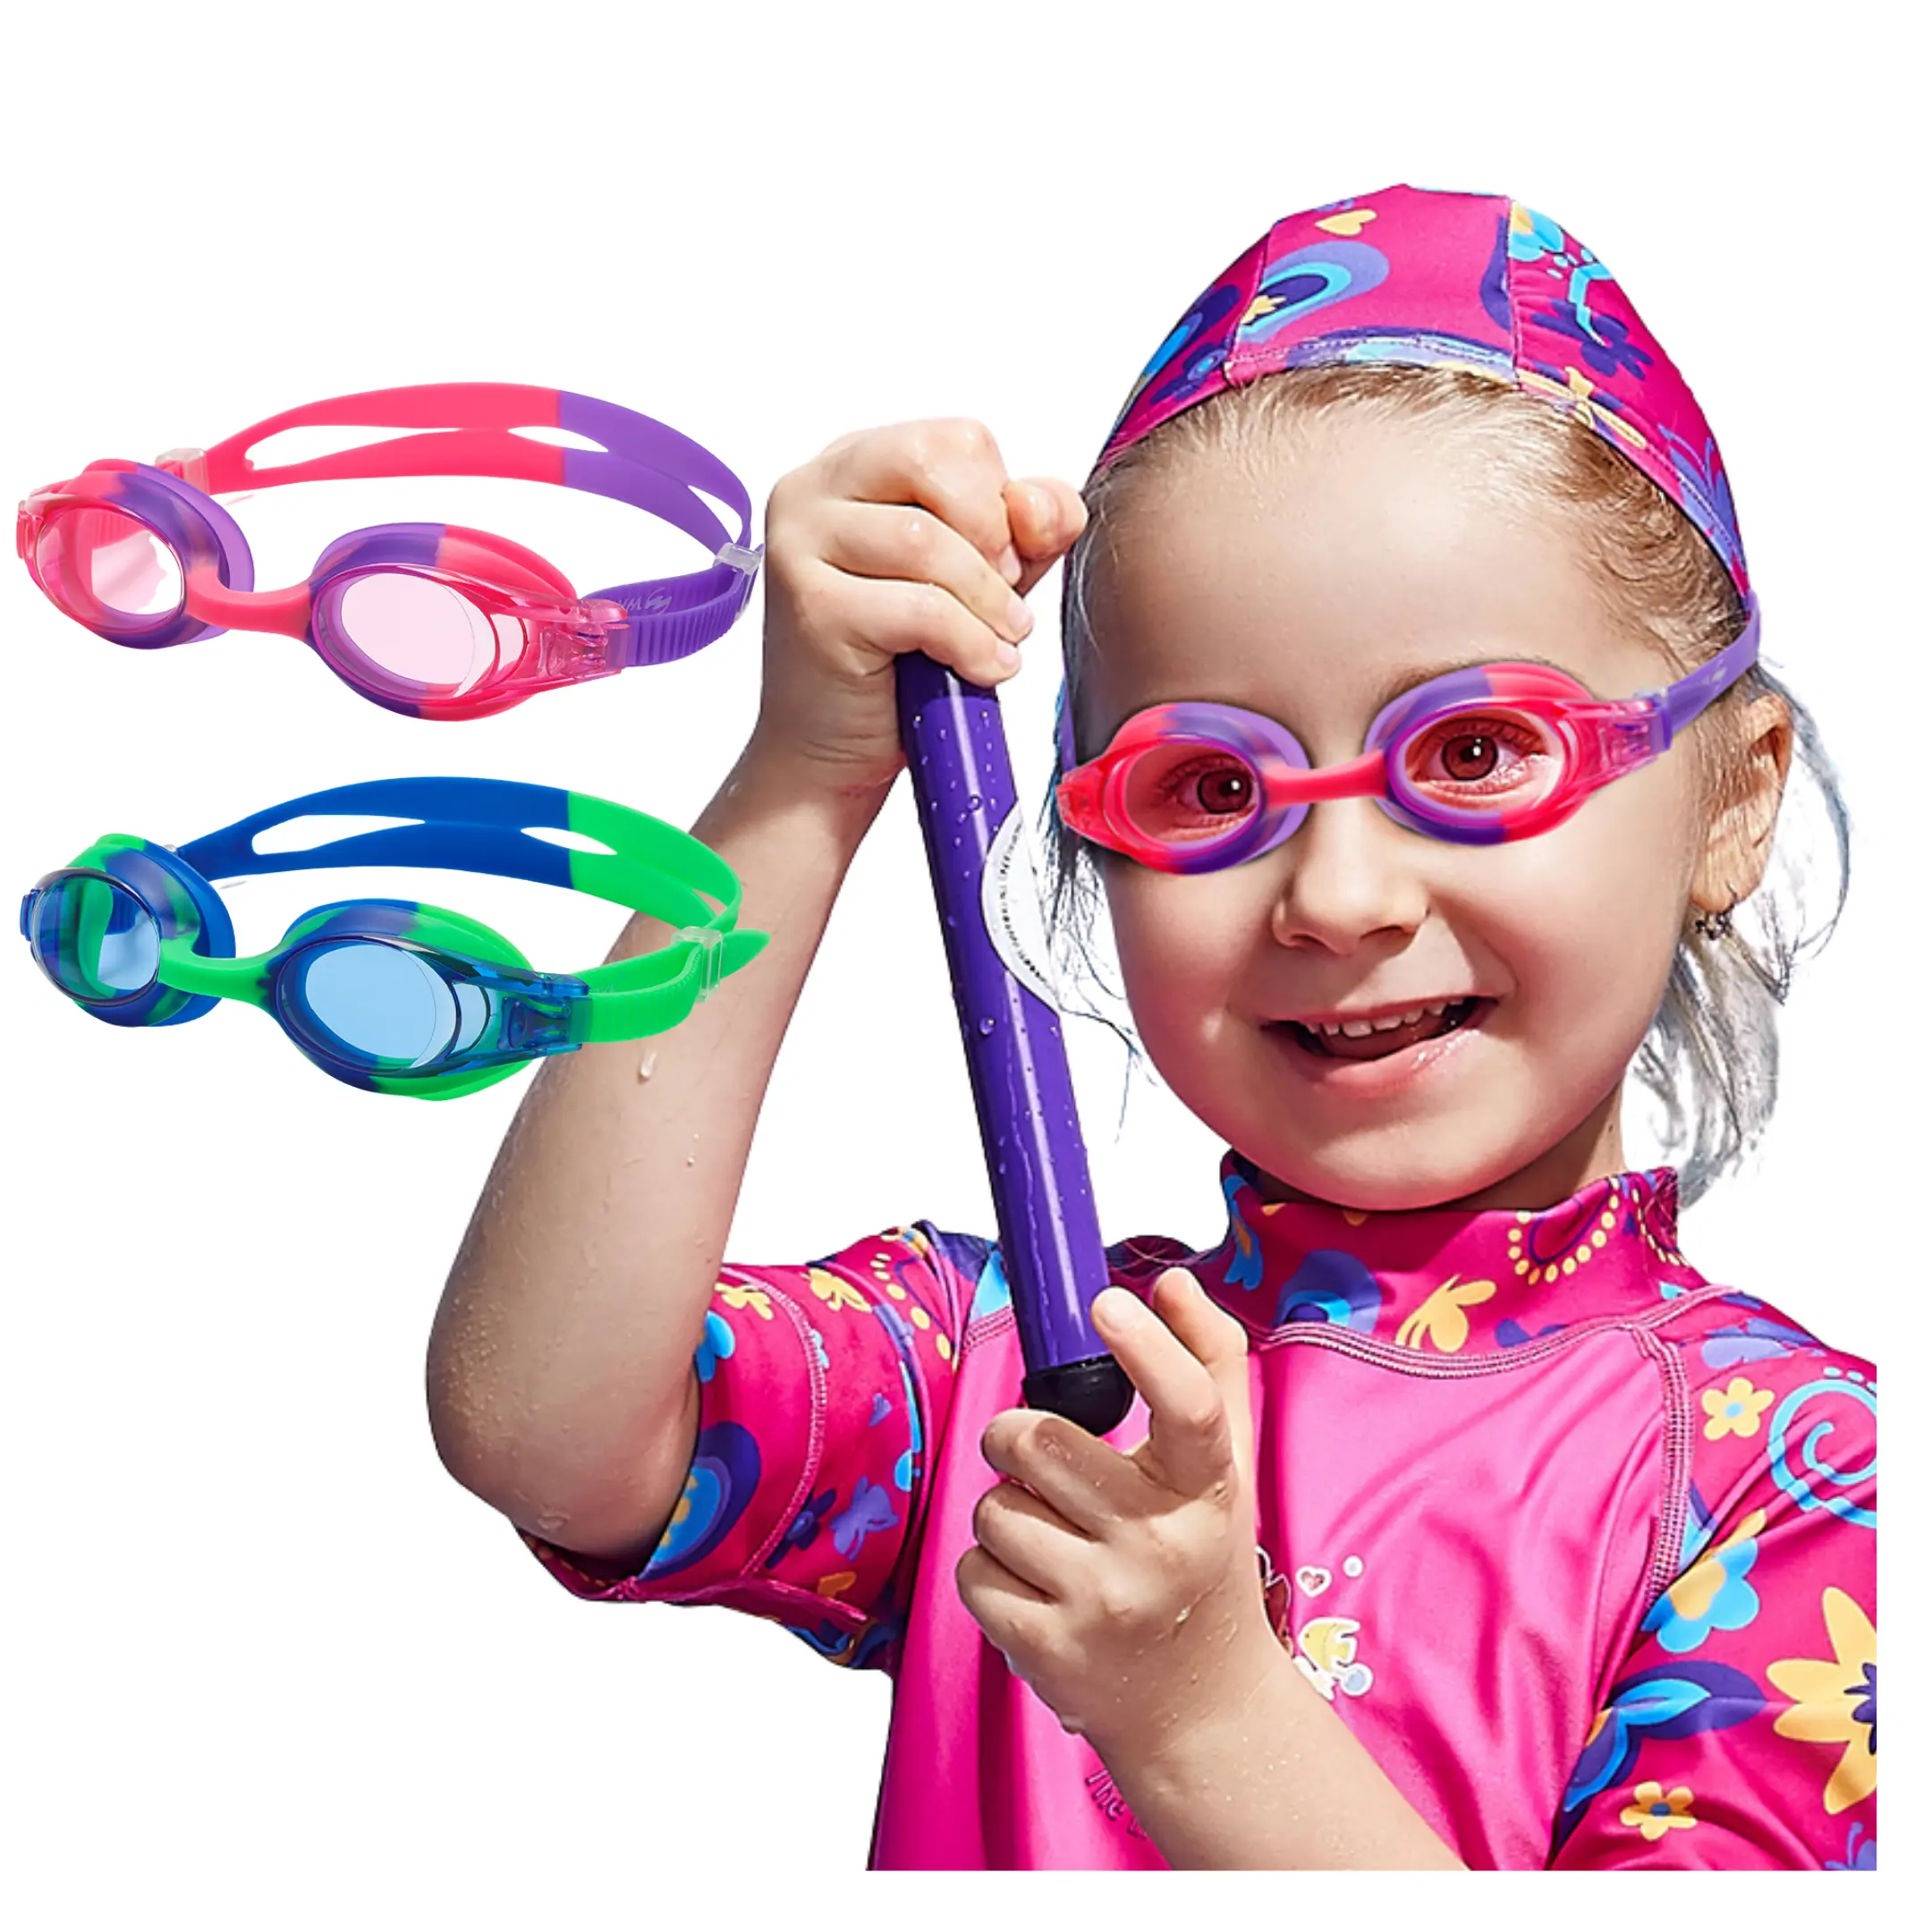 WAVE New design kids glasses swimming safety swim goggles double lens